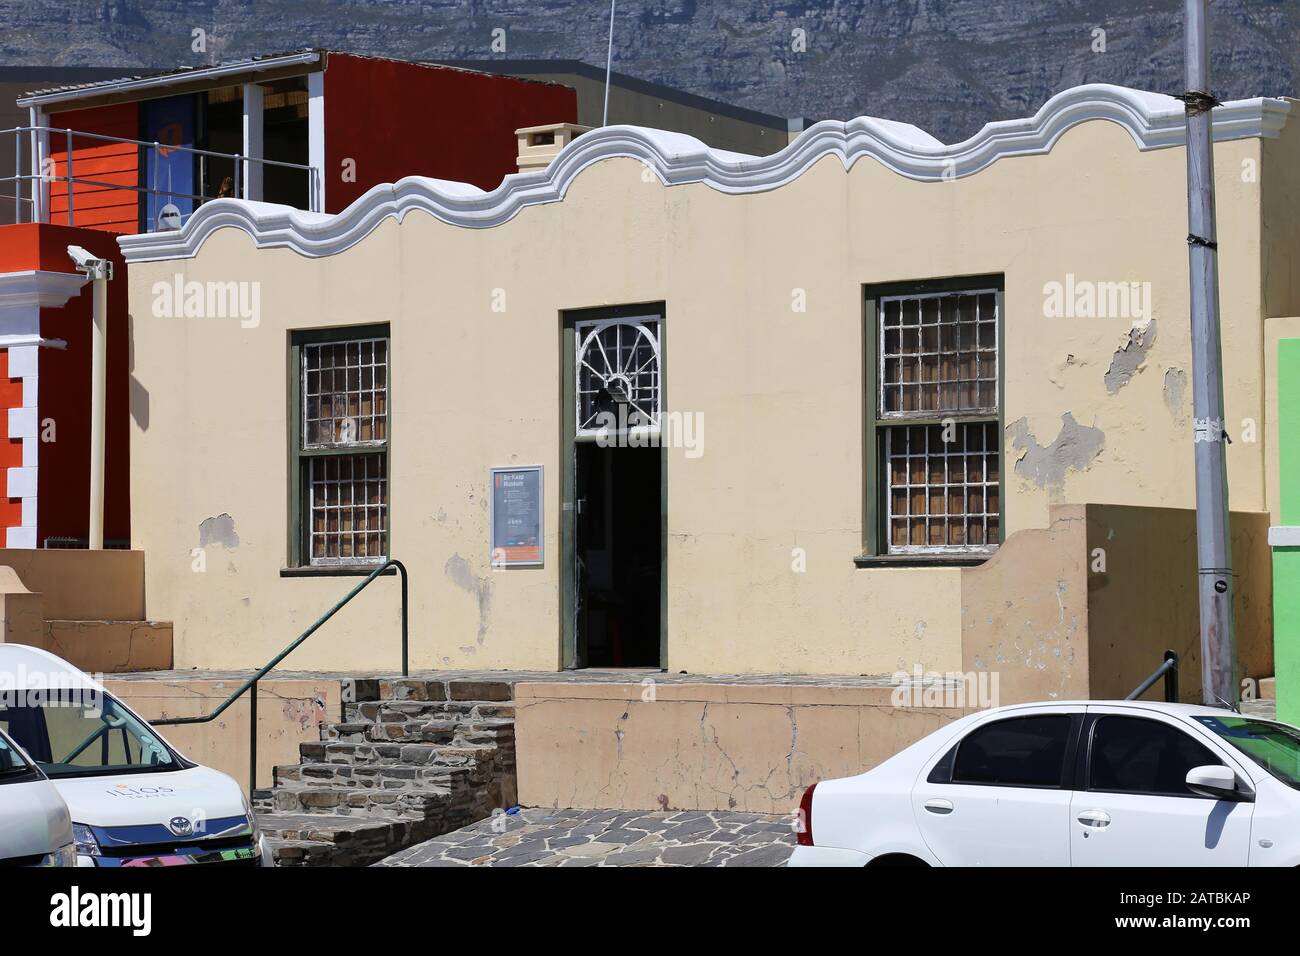 Iziko Bo Kaap Museum, Wale Street, Bo Kaap, Cape Town, Table Bay, Western Cape Province, South Africa, Africa Stock Photo